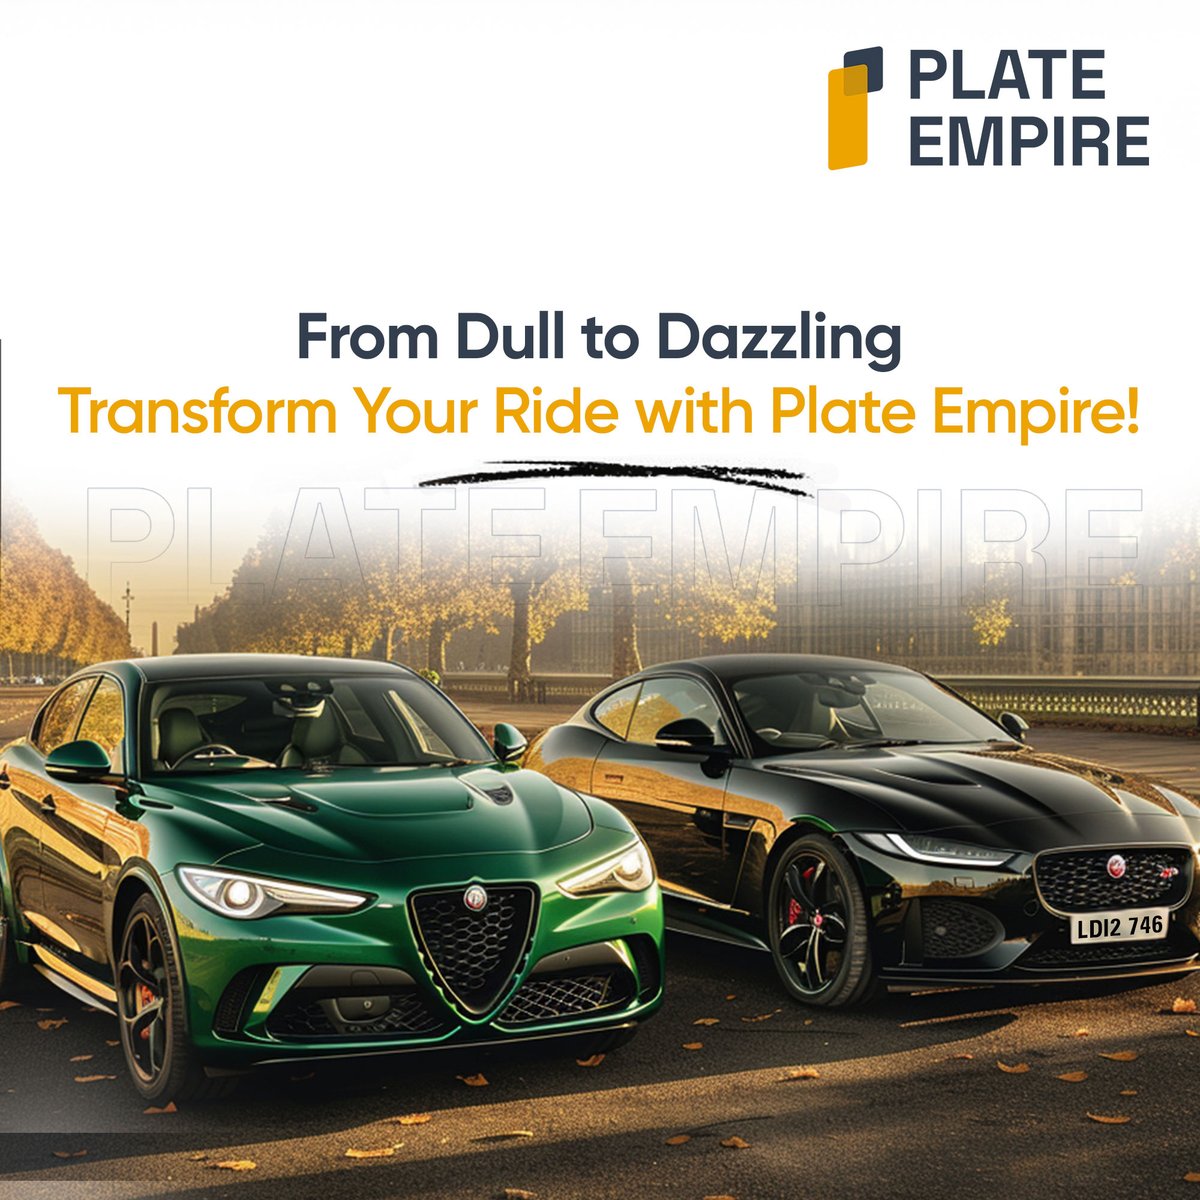 Tired of blending in? Plate Empire has got you covered! Elevate your ride to a whole new level of cool!

#plateempire #numberplates #personalisedplates #customplates #caraccessories #classiccars #vanityplates #drivenbystyle #carmodification #bikemodification #numberplates